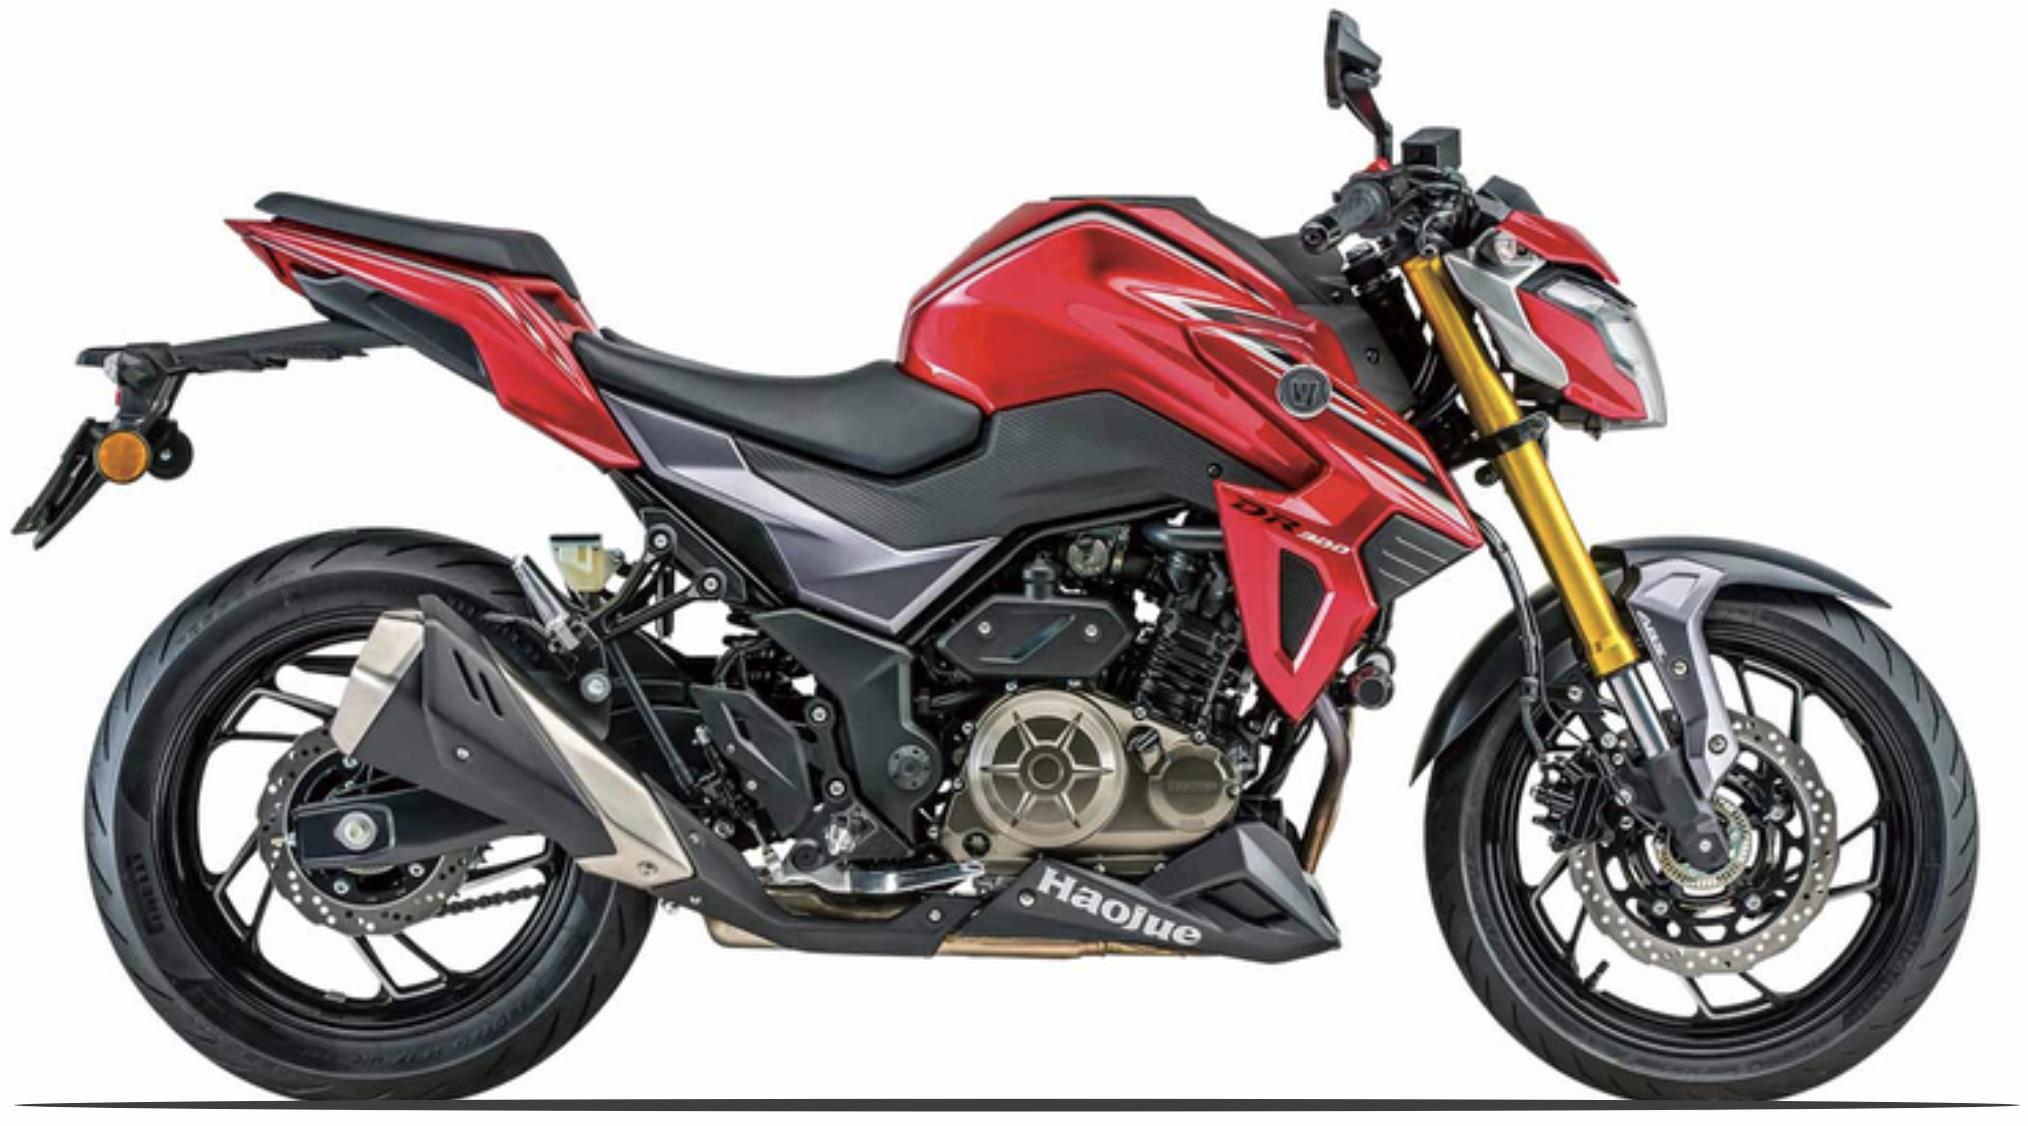 Suzuki GSX-S300 (Haojue DR300) Specs and Expected Price in India